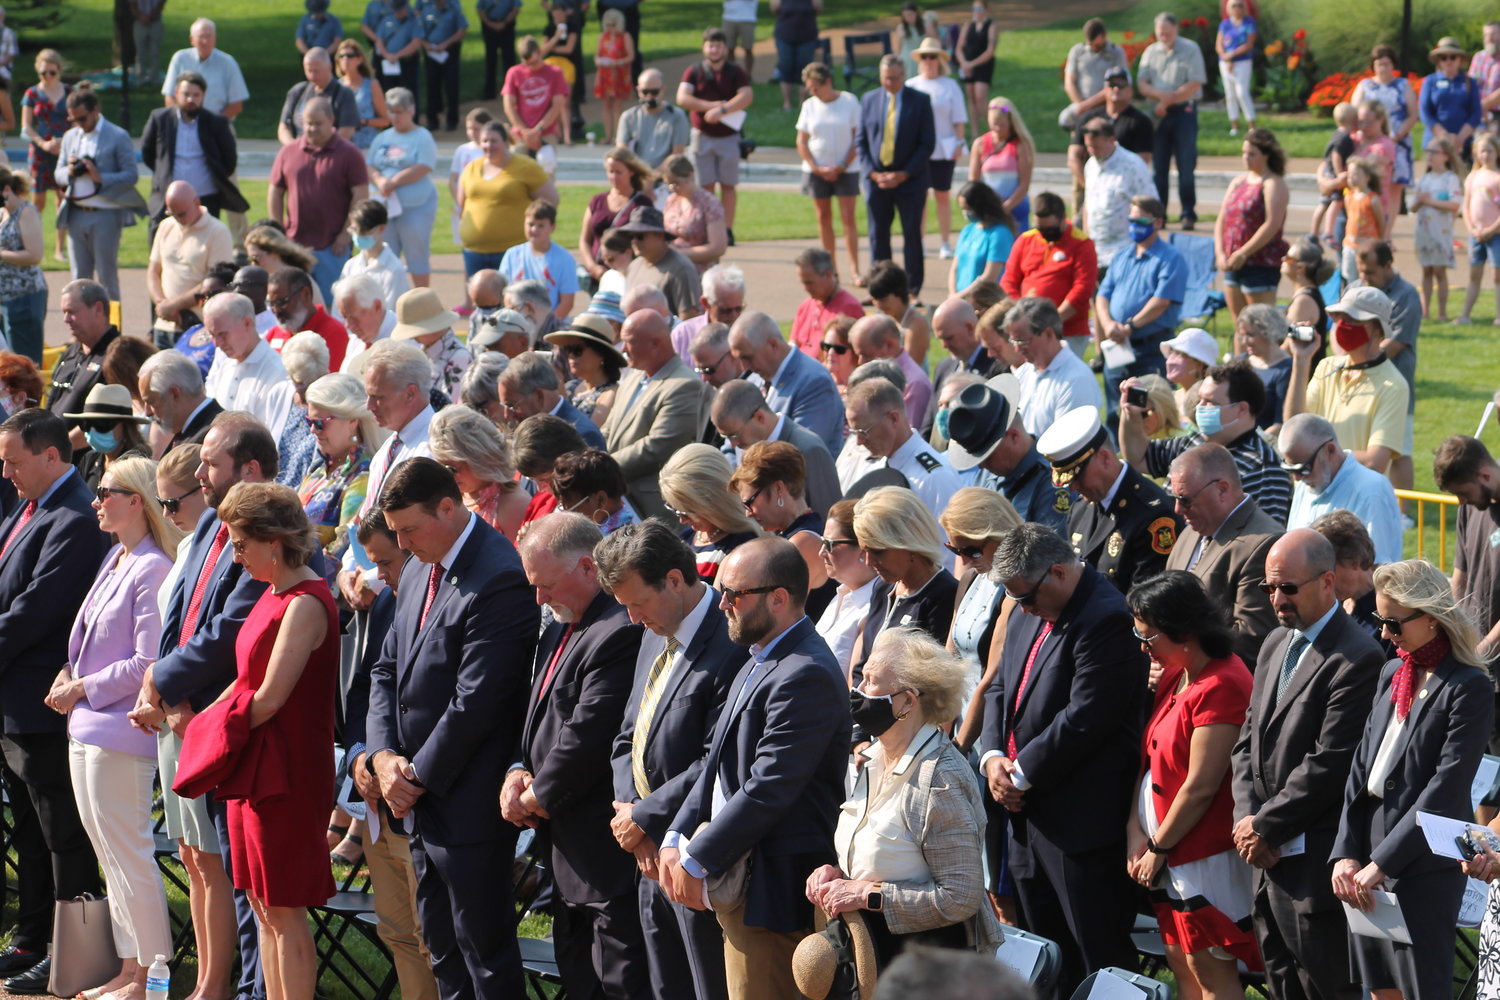 Participants in the Aug. 10 Statehood Day festivities at the Capitol bow their heads during the Invocation.